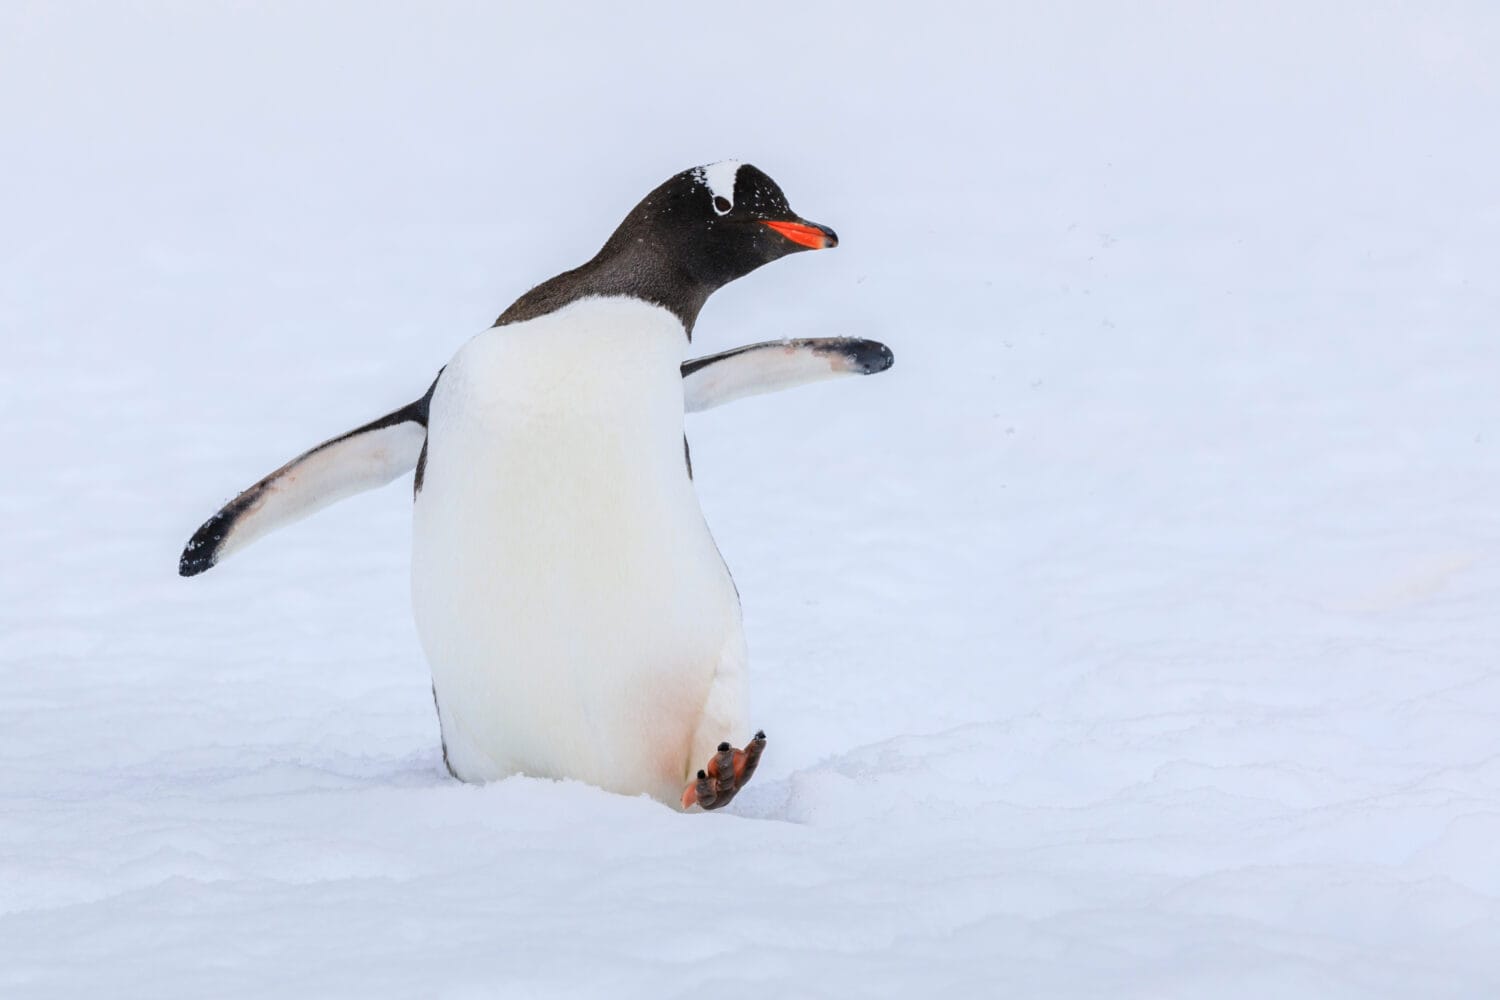 Close up portrait of one gentoo penguin (Pygoscelis papua) walking in the snow of Antarctica with foot raised, wings outstretched, looking at the camera with beak in profile on a white background